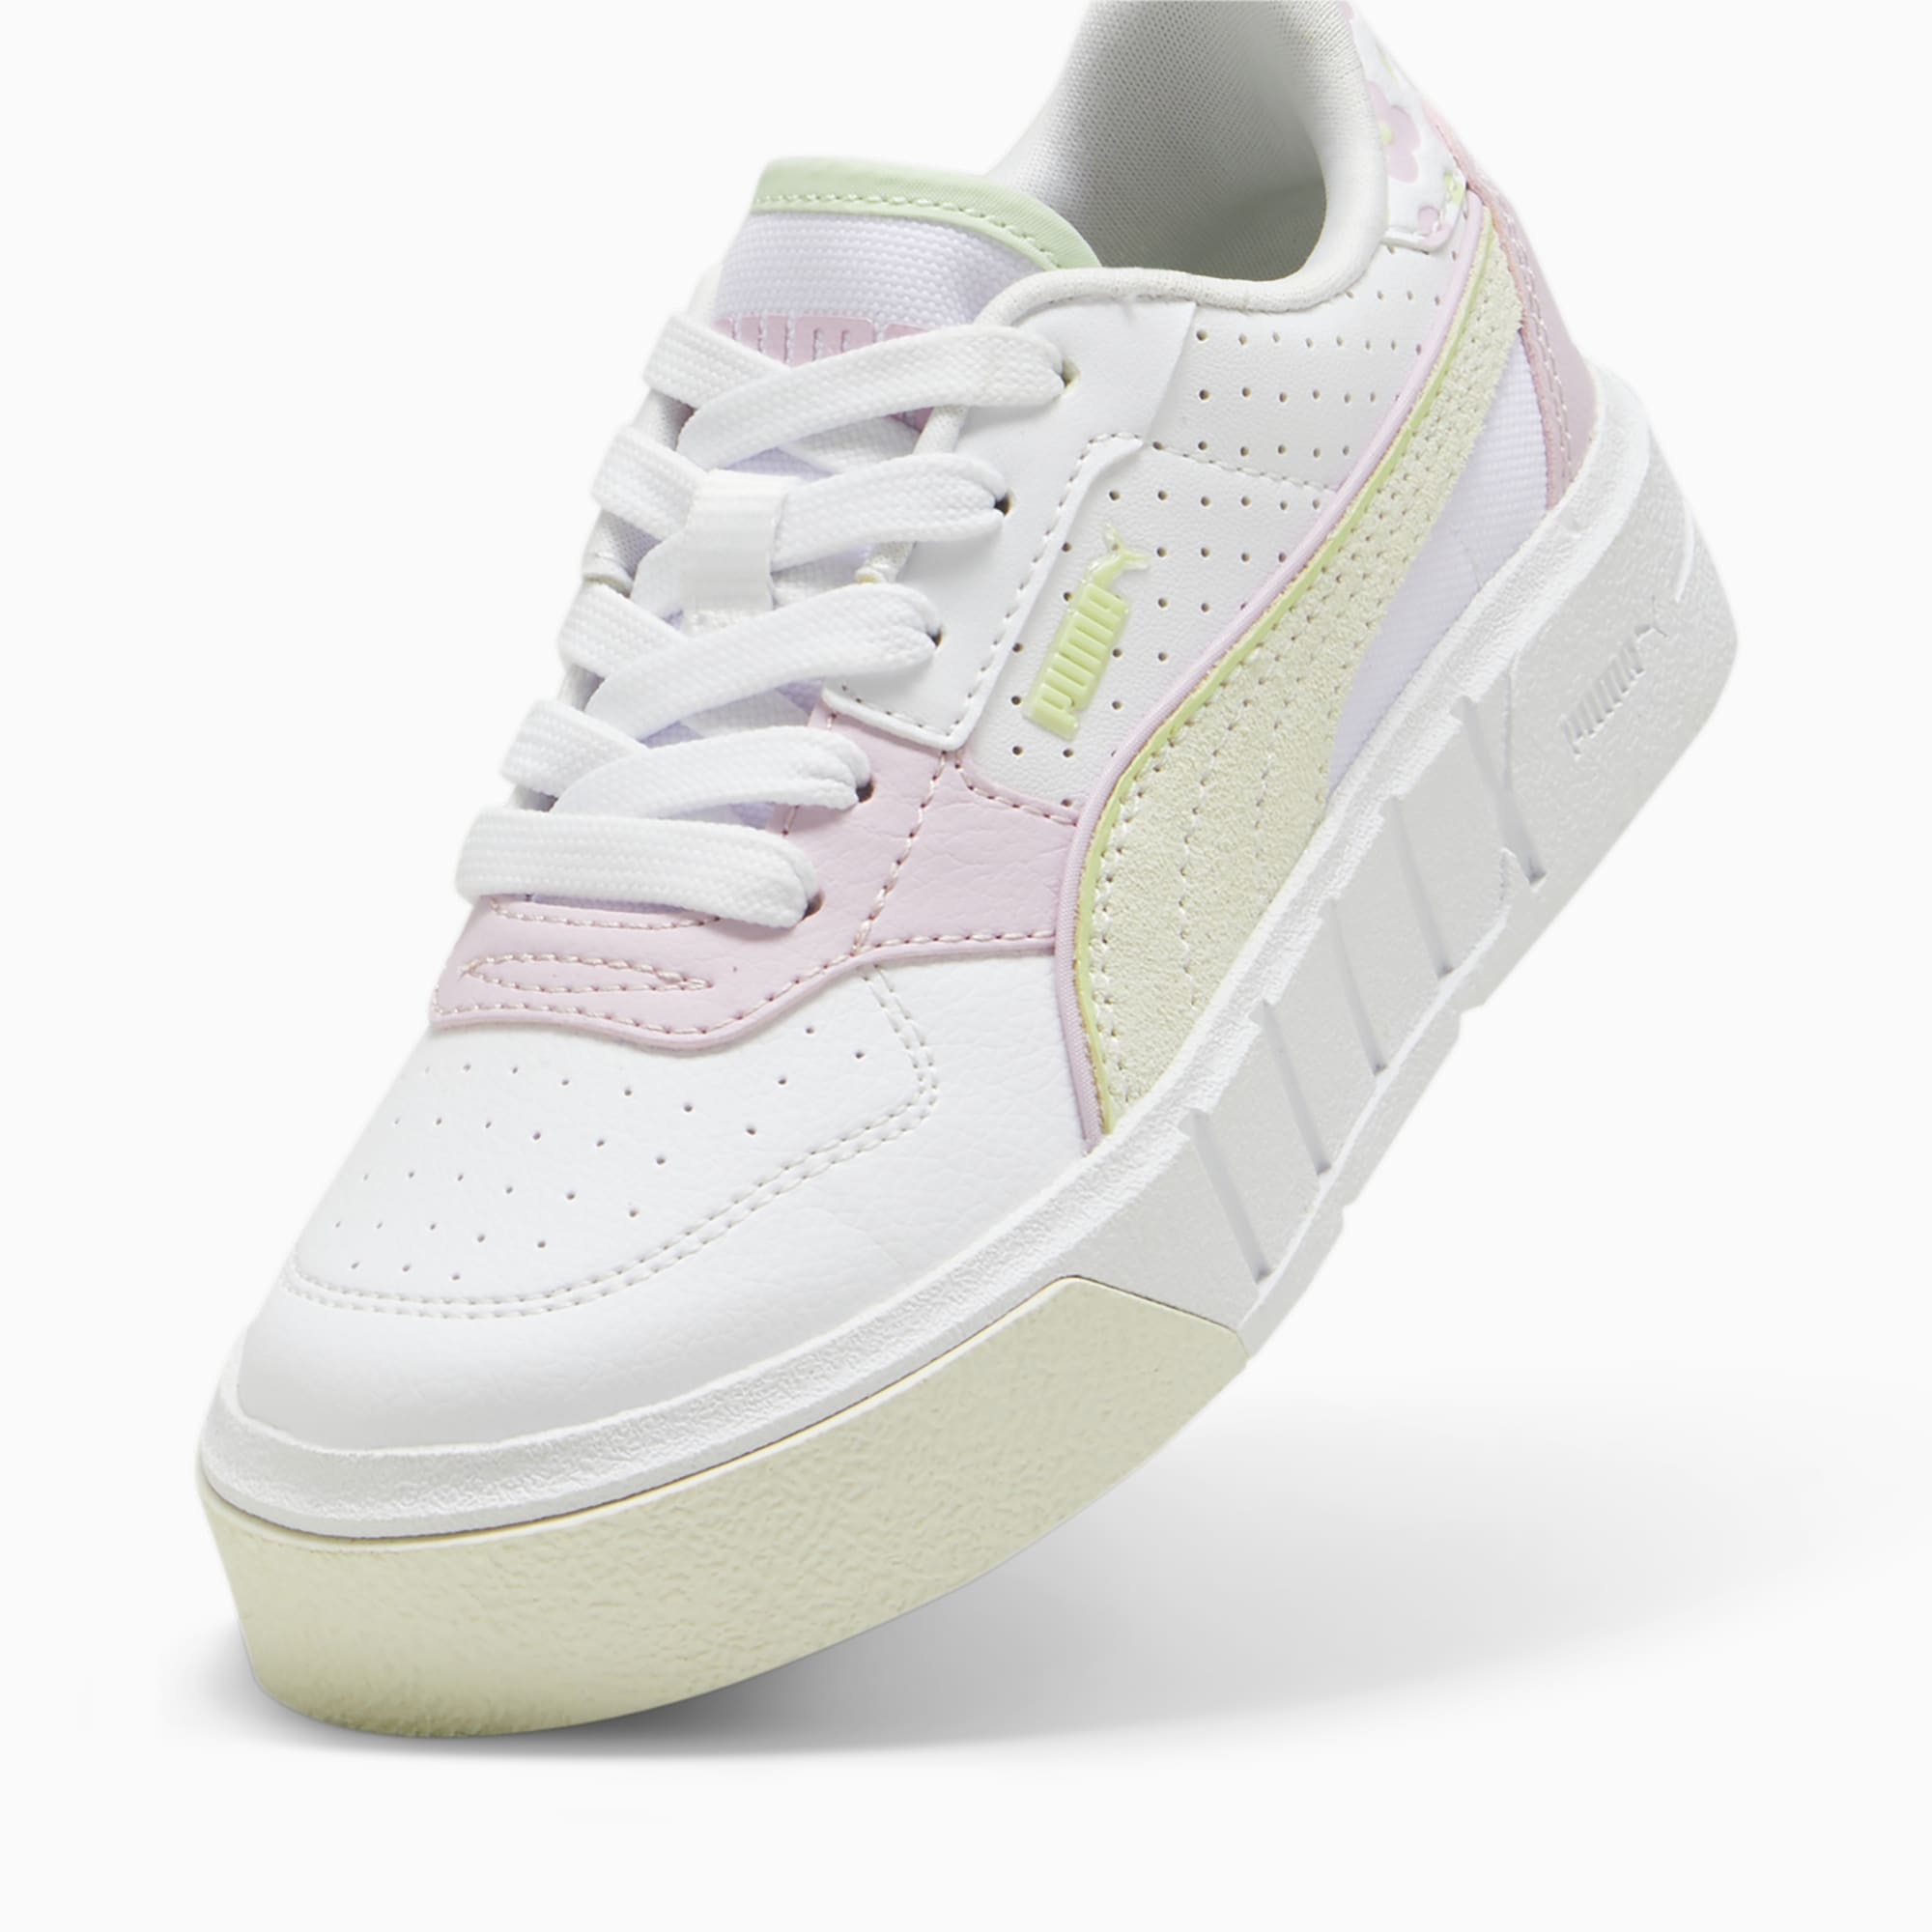 PUMA Cali Court Little Kids' Leather Sneakers